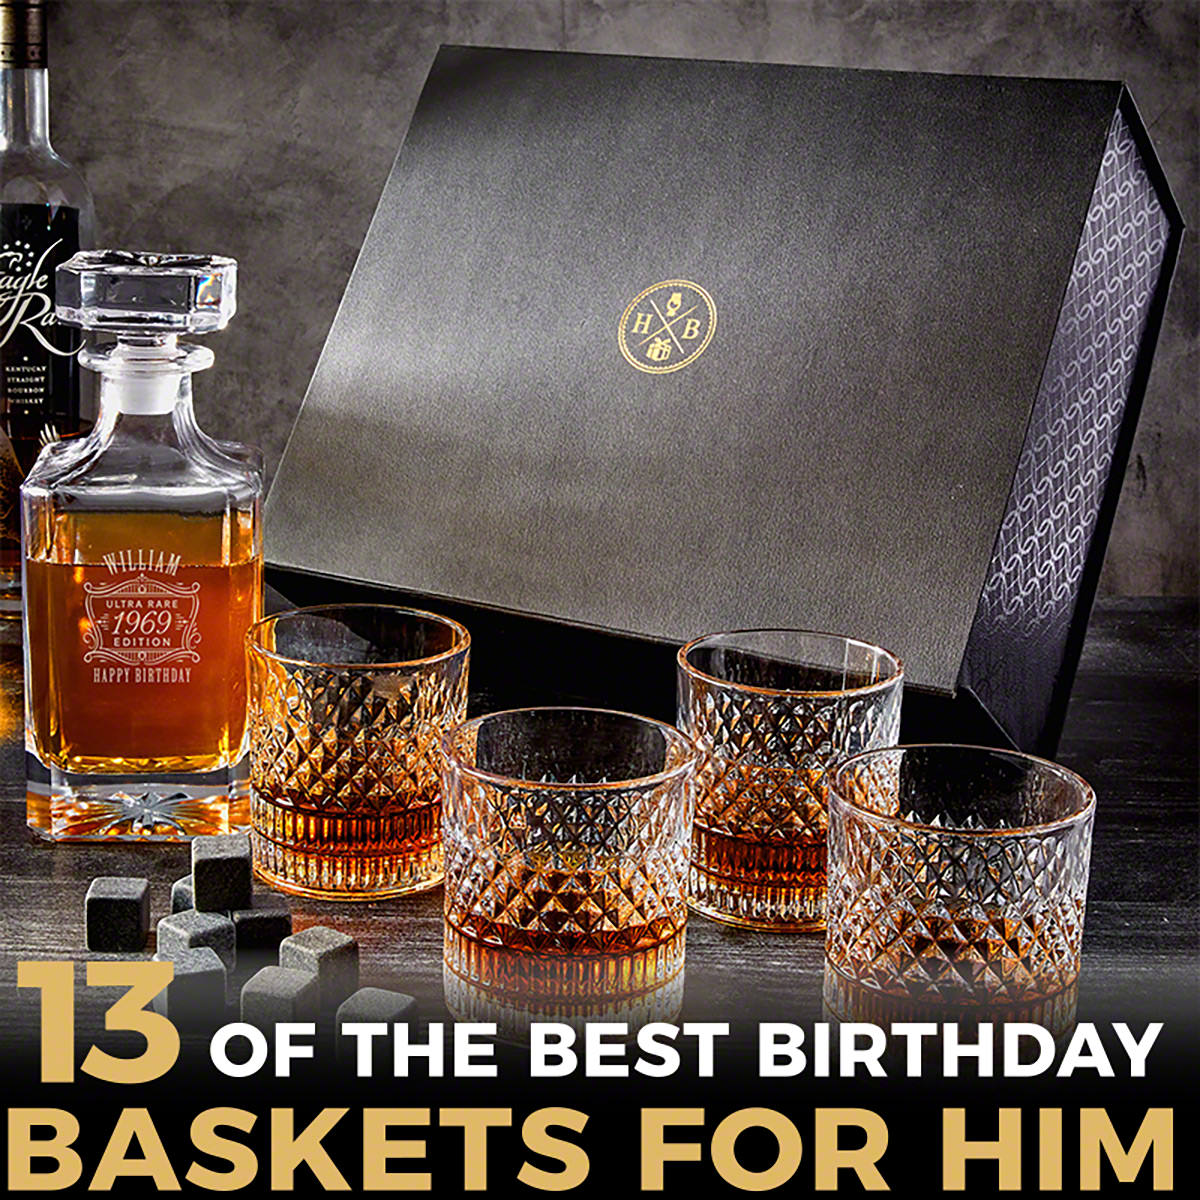 13 of the Best Birthday Baskets for Him